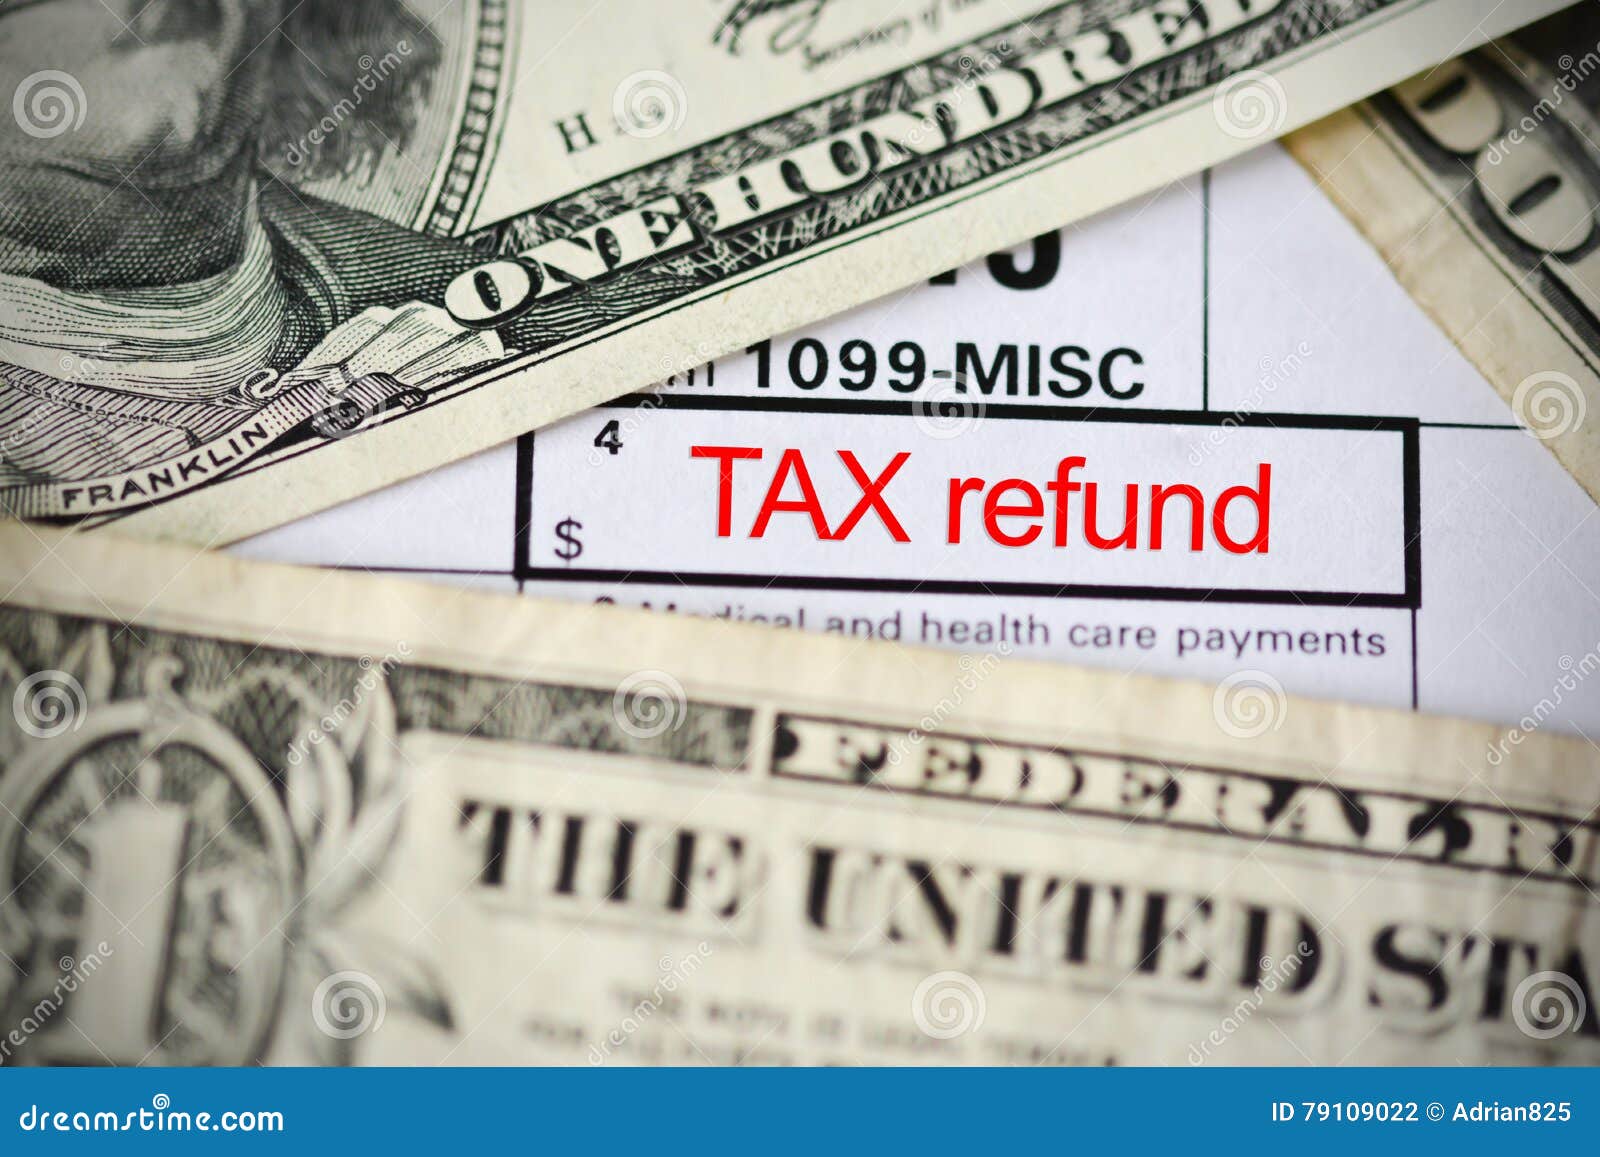 claim-tax-refund-concept-form-template-stock-photos-free-royalty